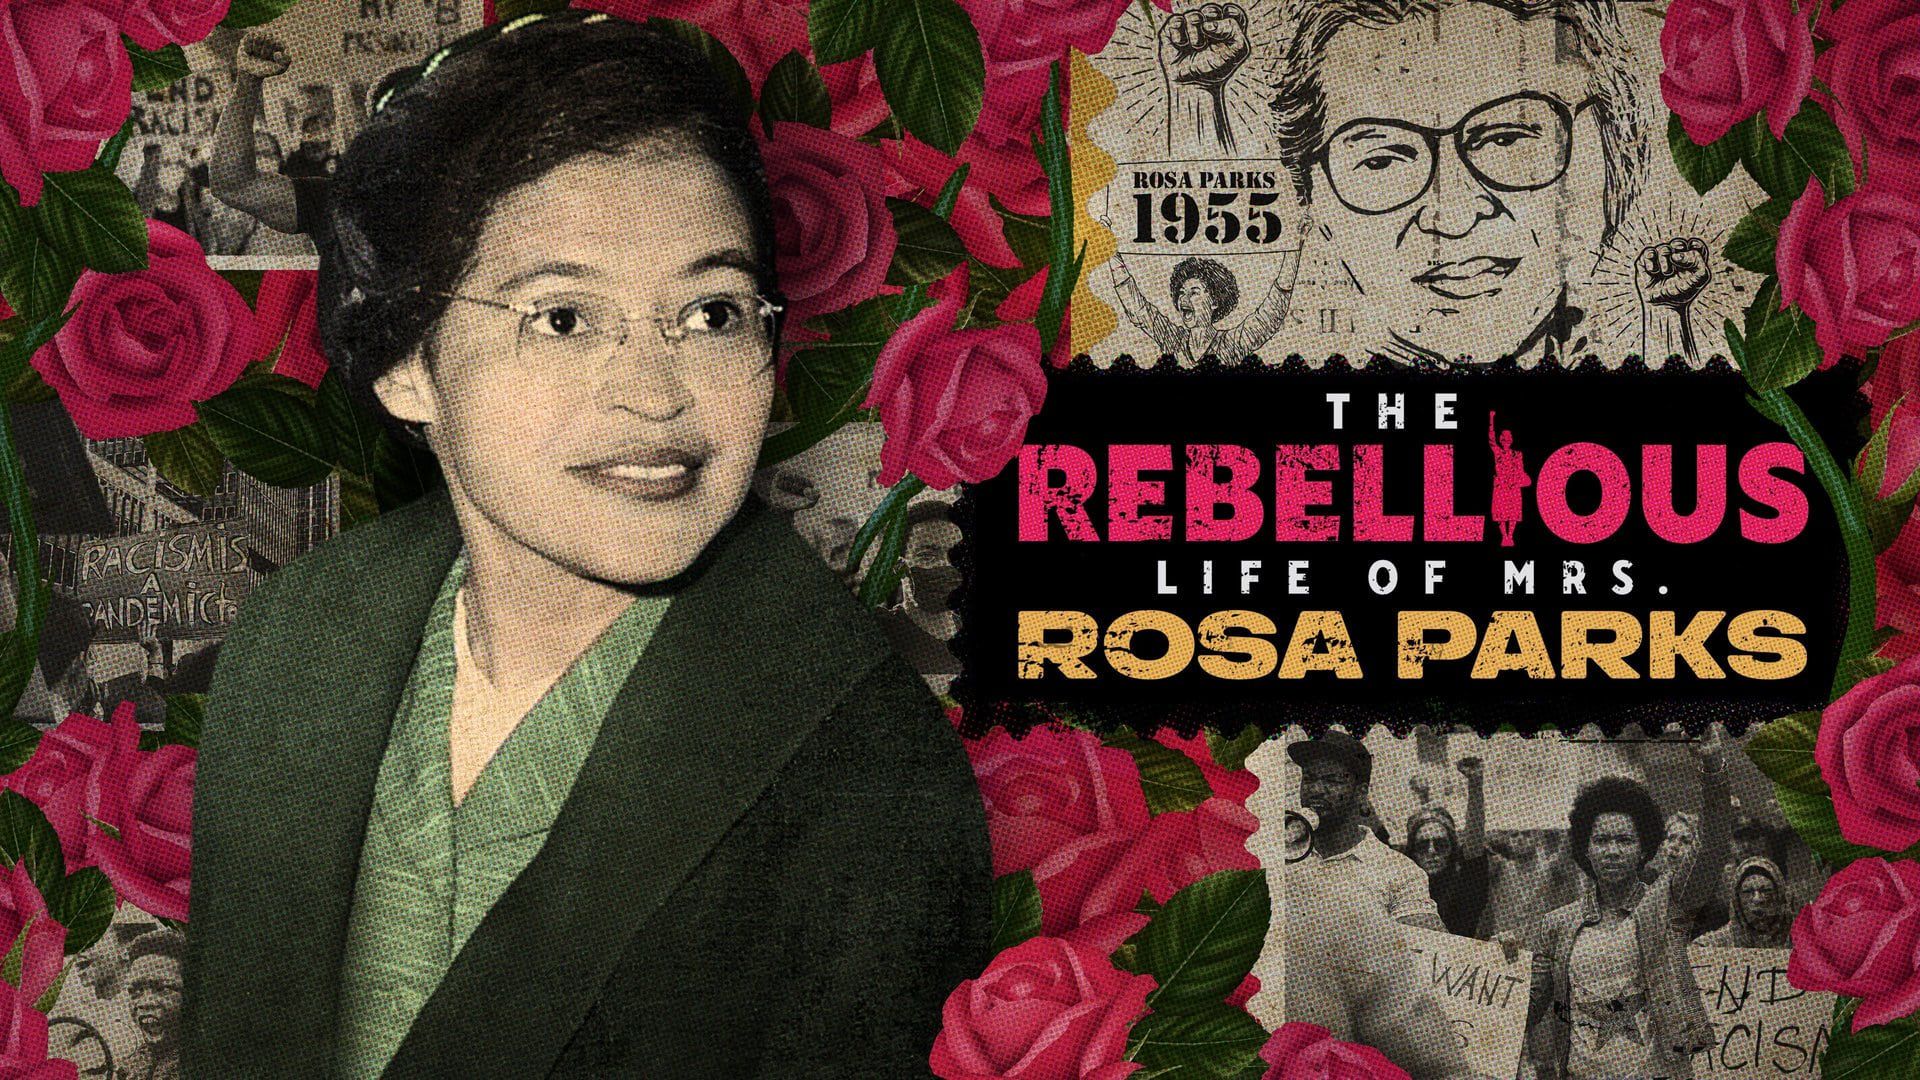 The Rebellious Life of Mrs. Rosa Parks background